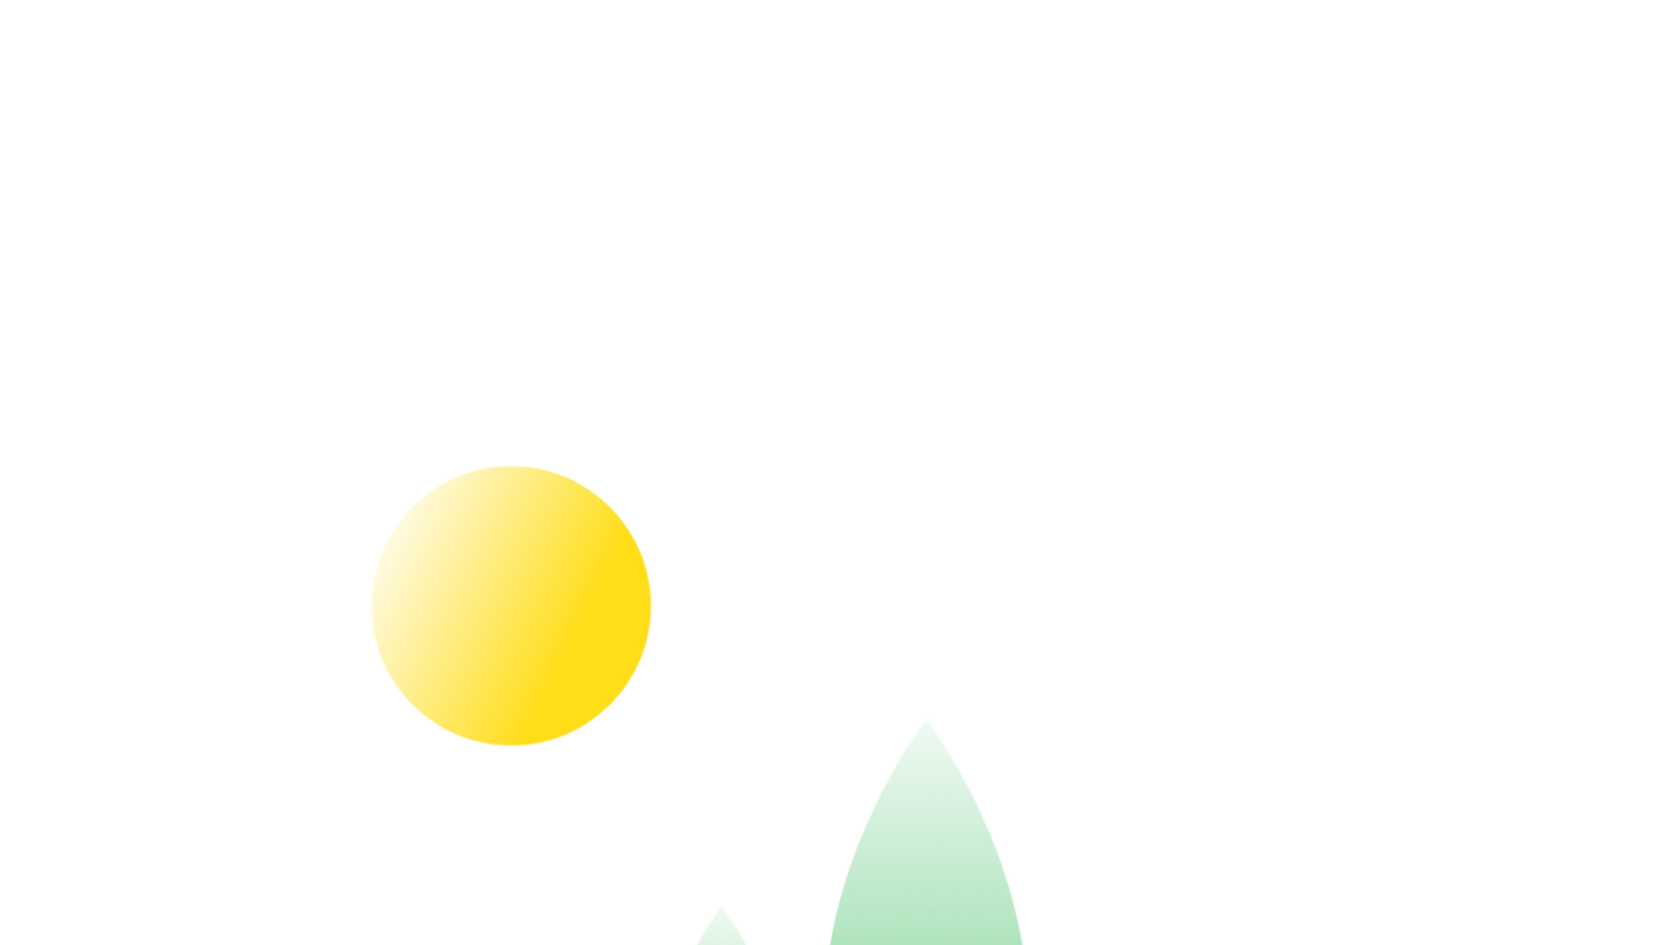 An illustration of hills, trees, sand and the sun.